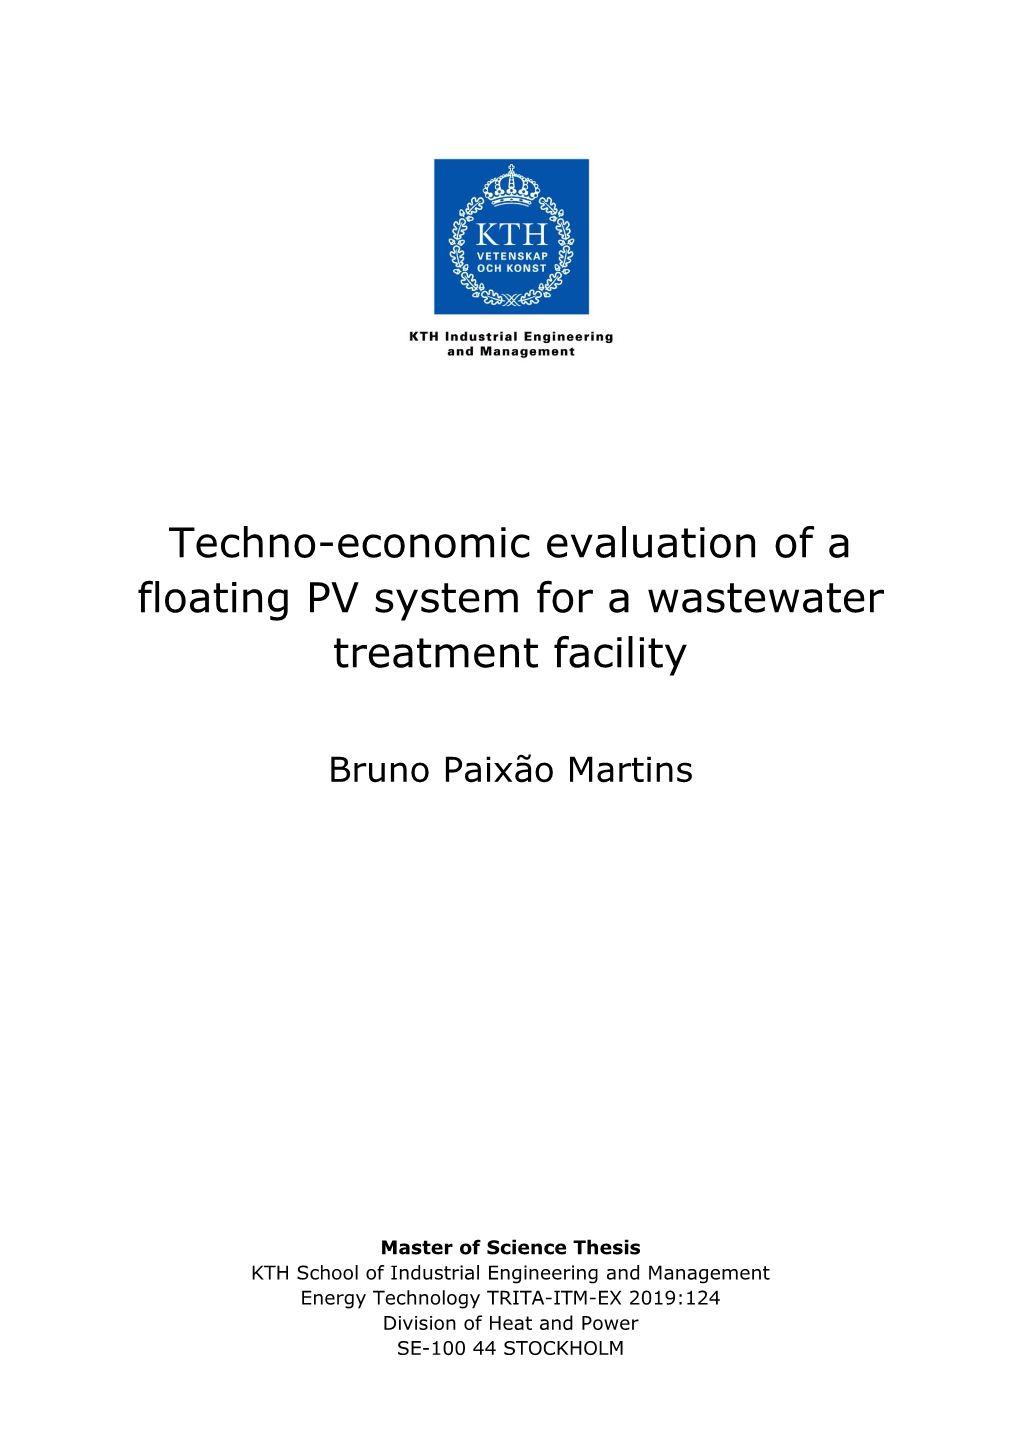 Techno-Economic Evaluation of a Floating PV System for a Wastewater Treatment Facility